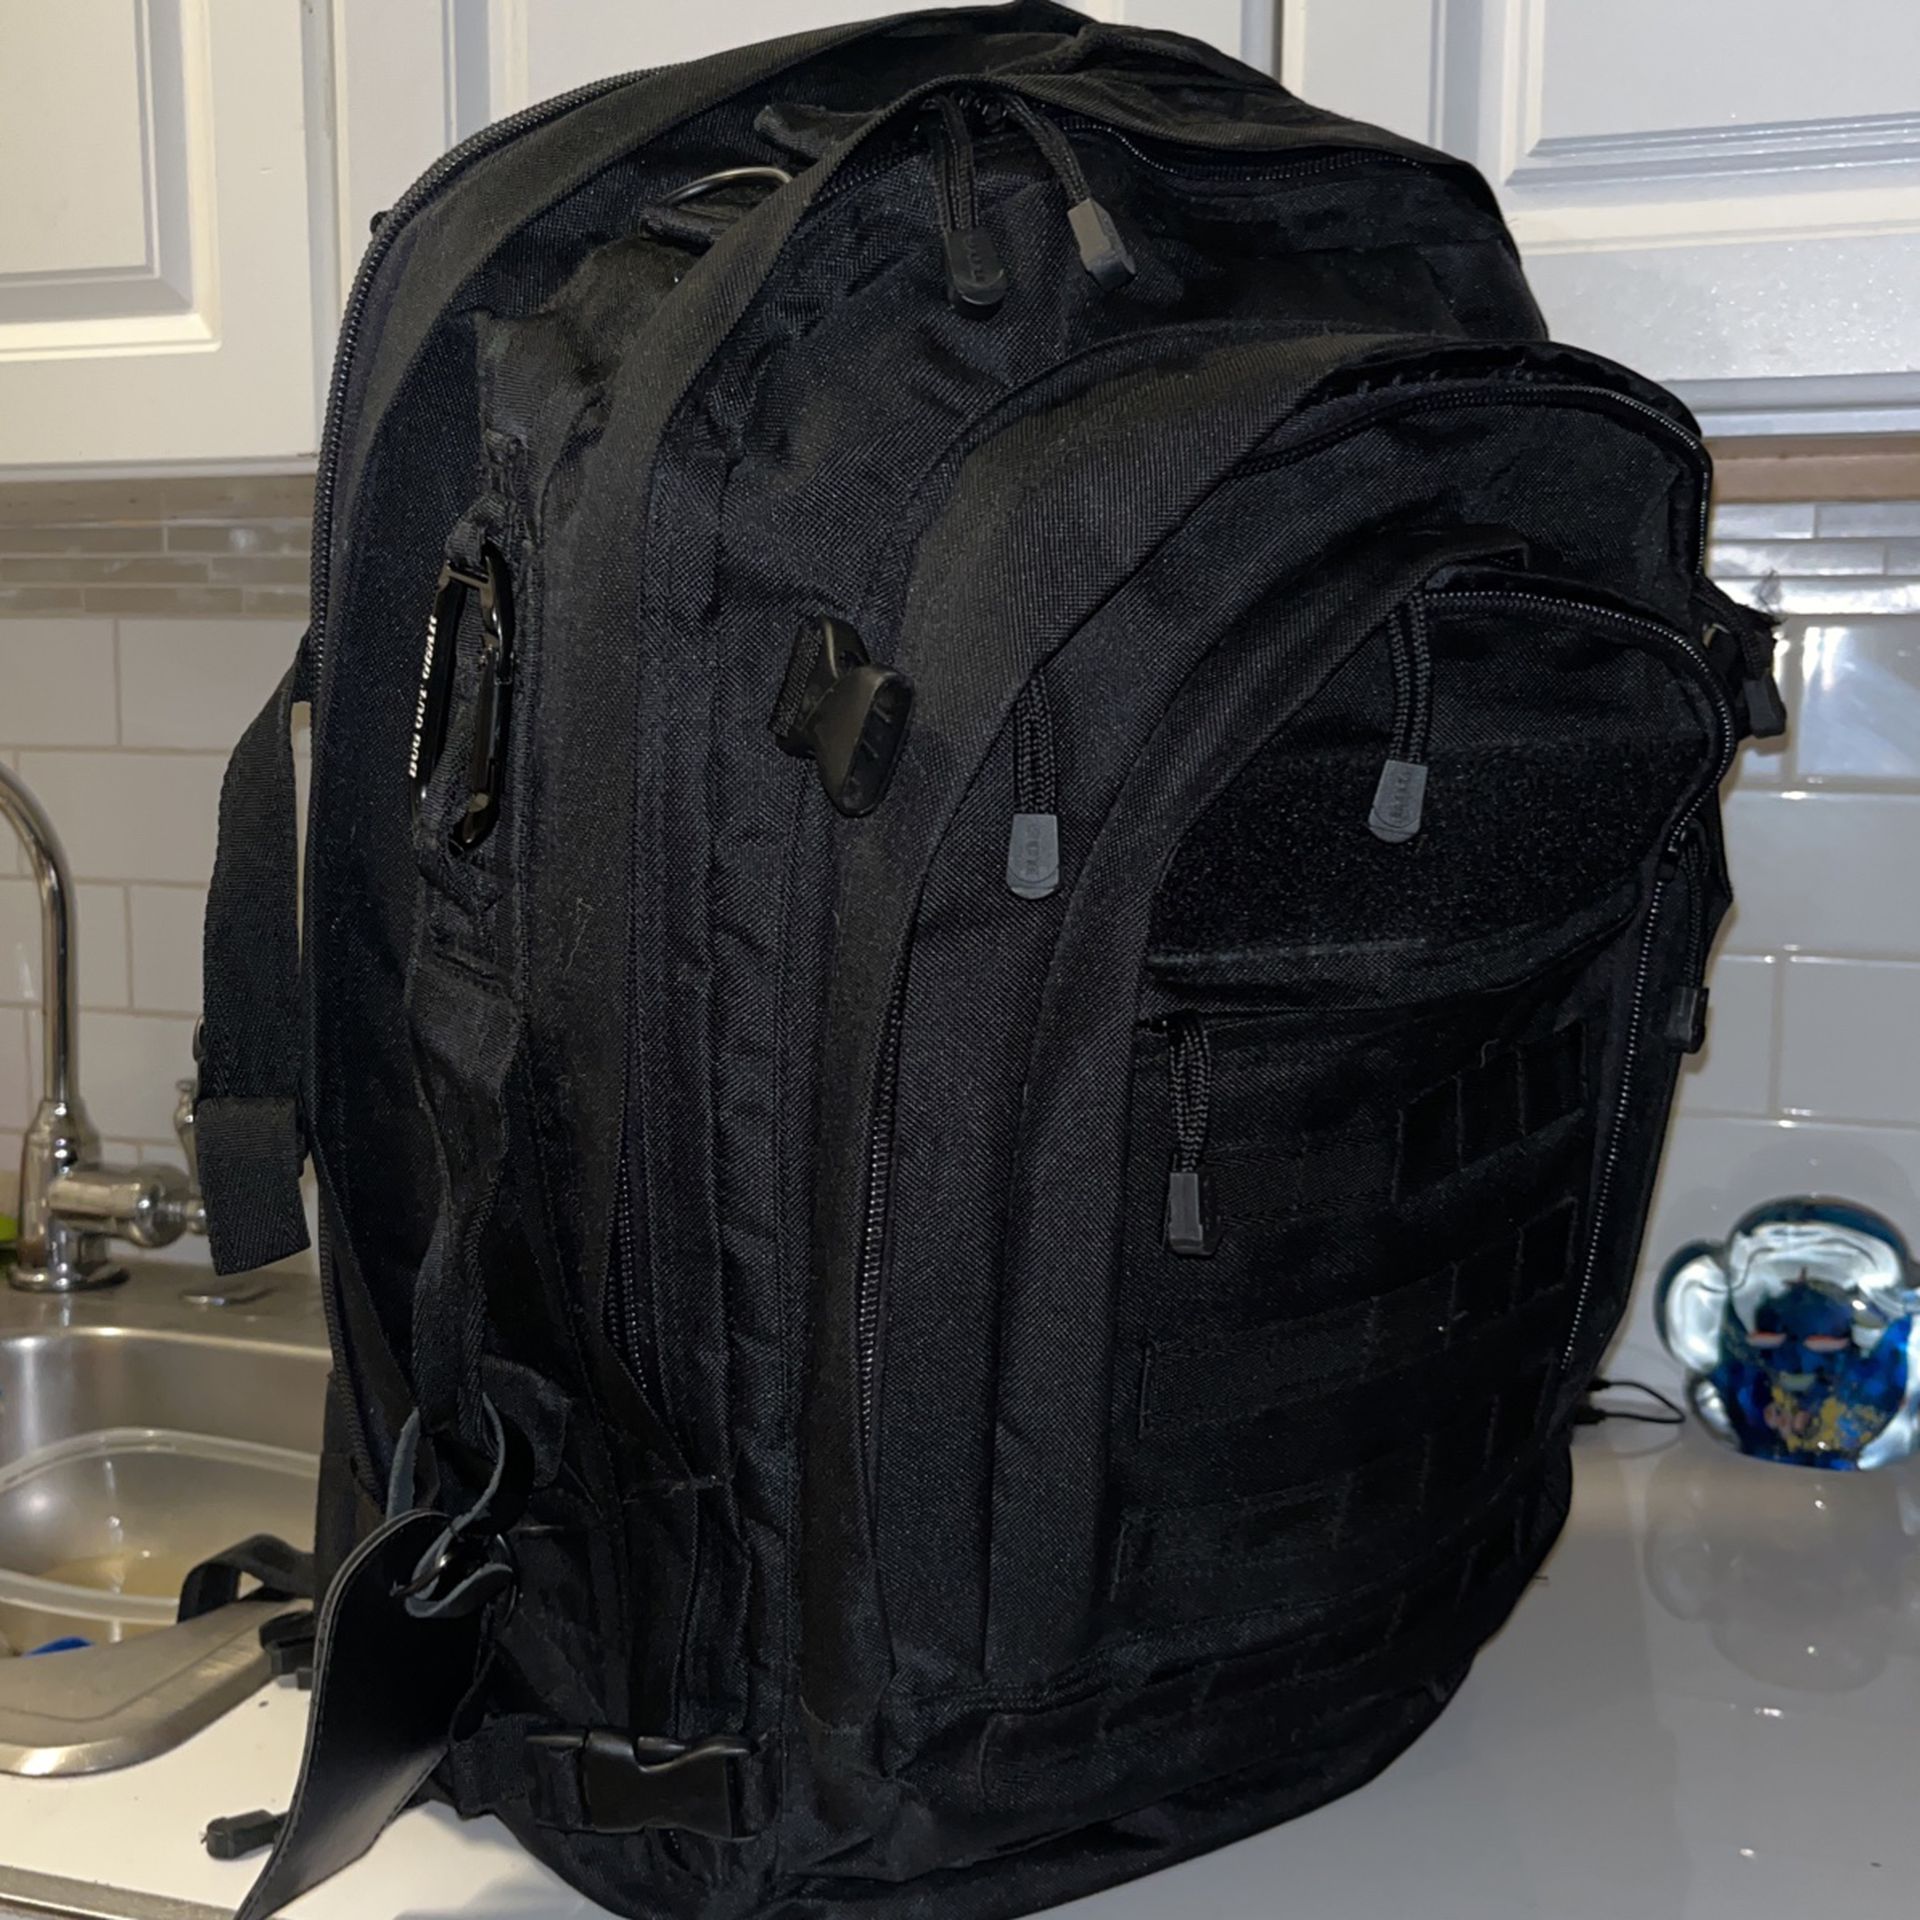 BUG OUT GEAR BACK PACK